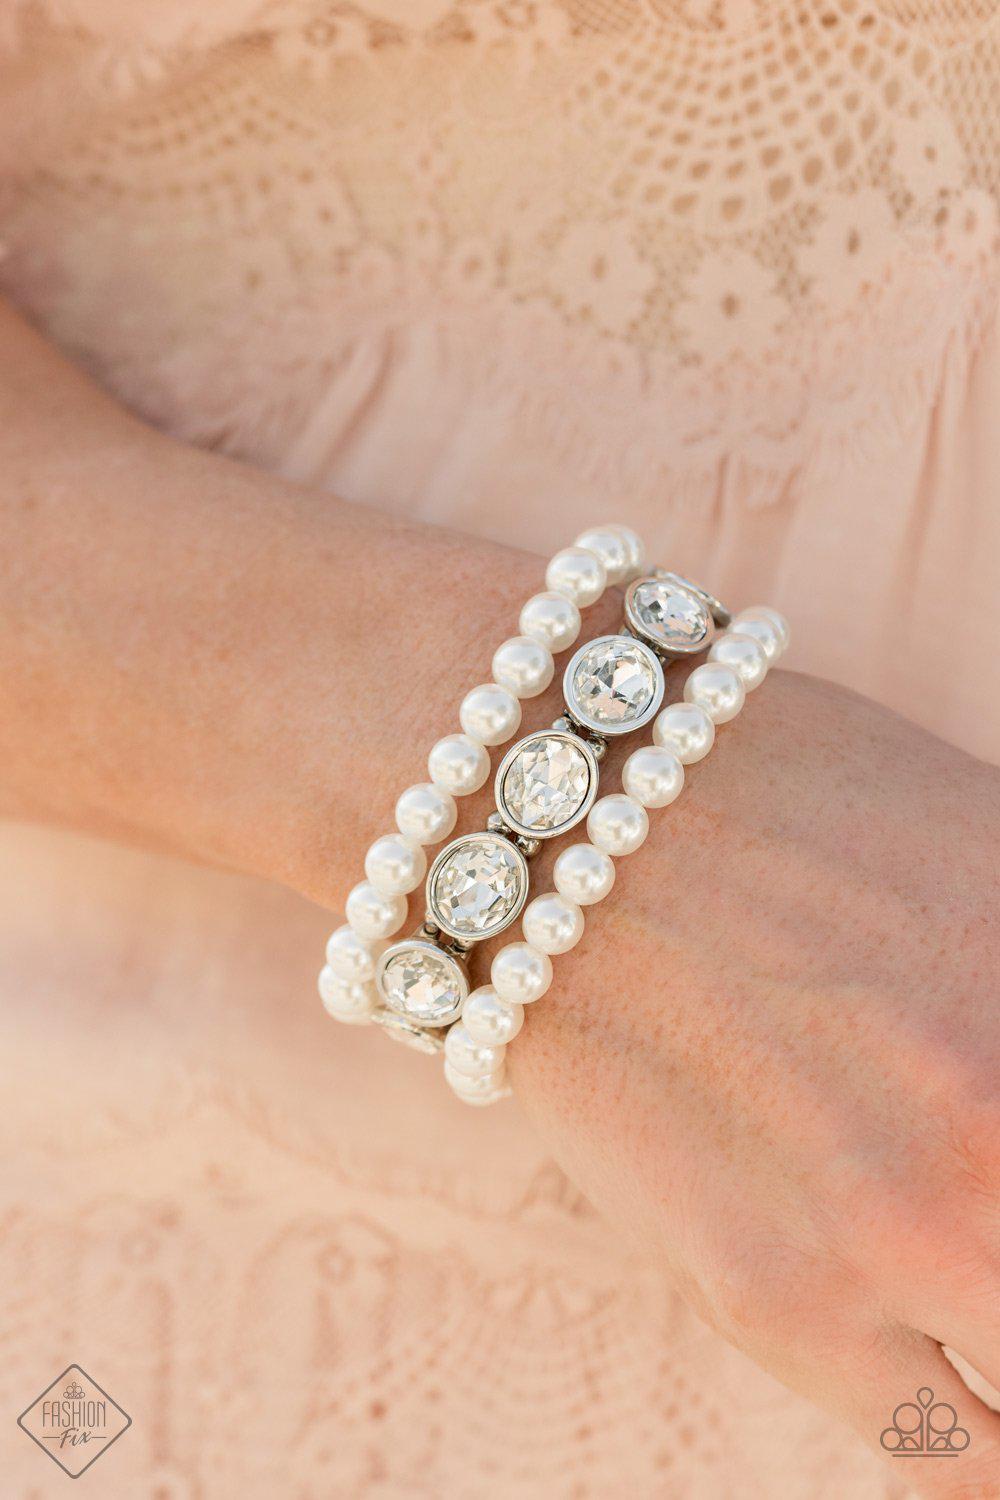 Flawlessly Flattering White Pearl and Rhinestone Stretch Bracelet Set - Paparazzi Accessories - model -CarasShop.com - $5 Jewelry by Cara Jewels